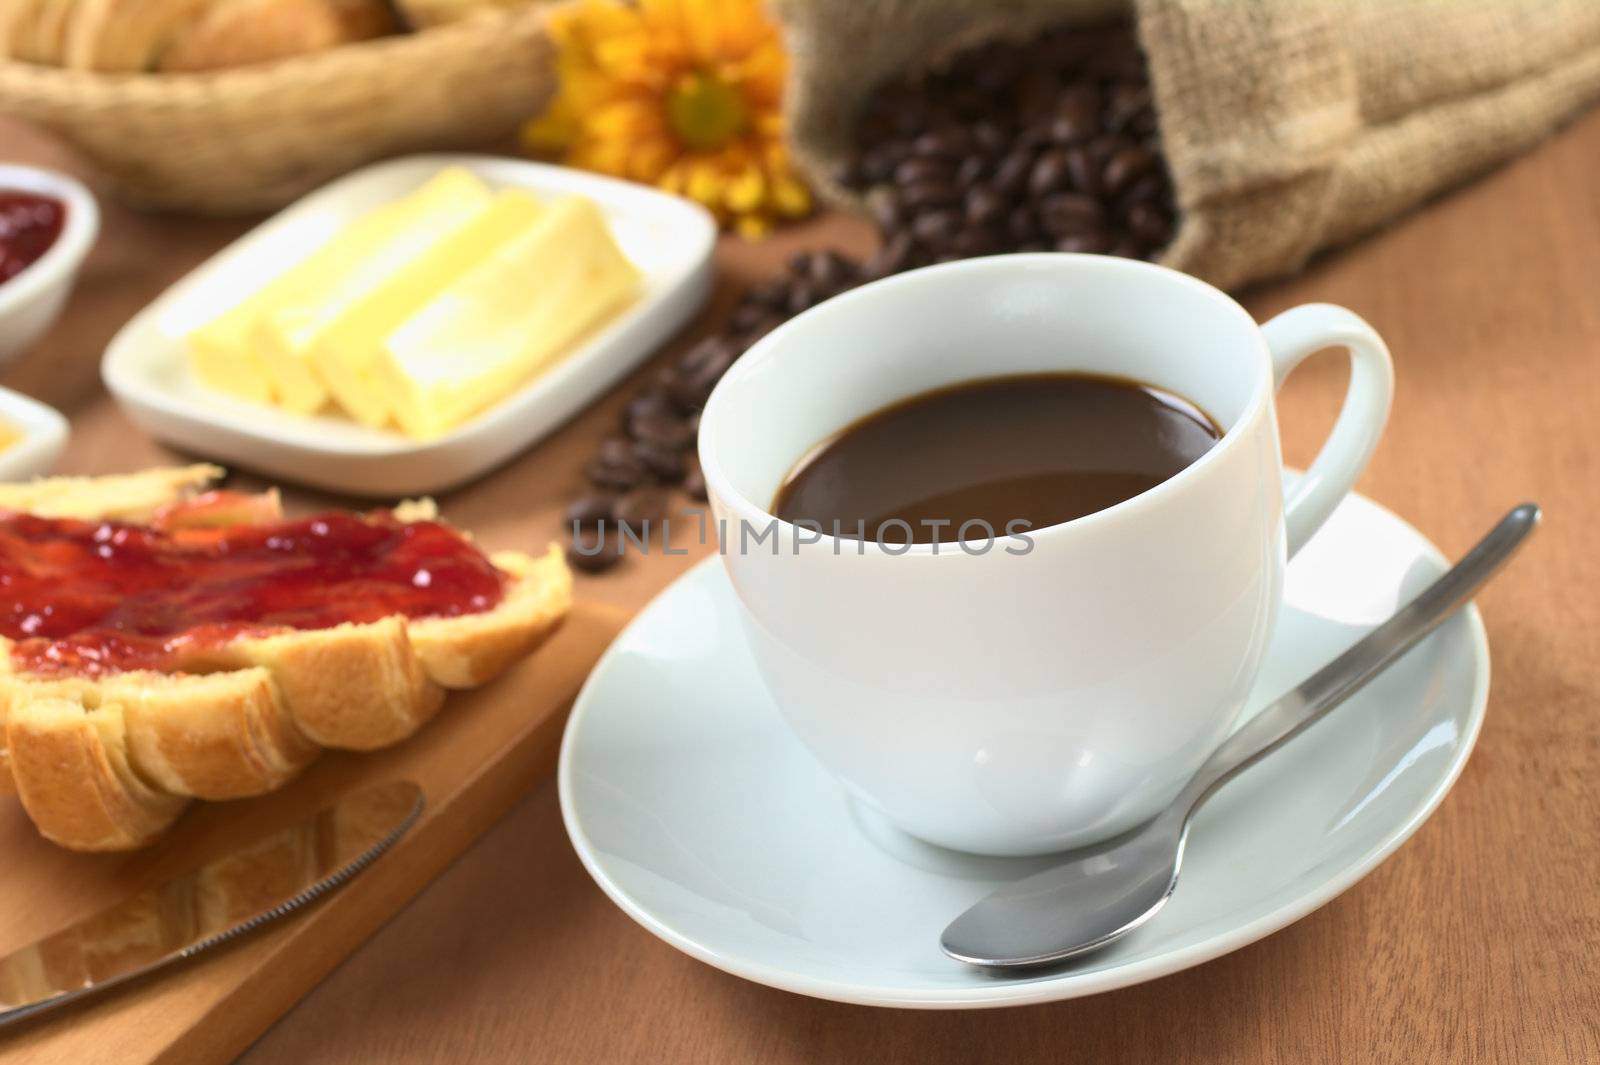 Hot, fresh coffee with croissant with strawberry jam, butter and coffee beans in the back (Selective Focus, Focus on the front rim of the coffee cup)